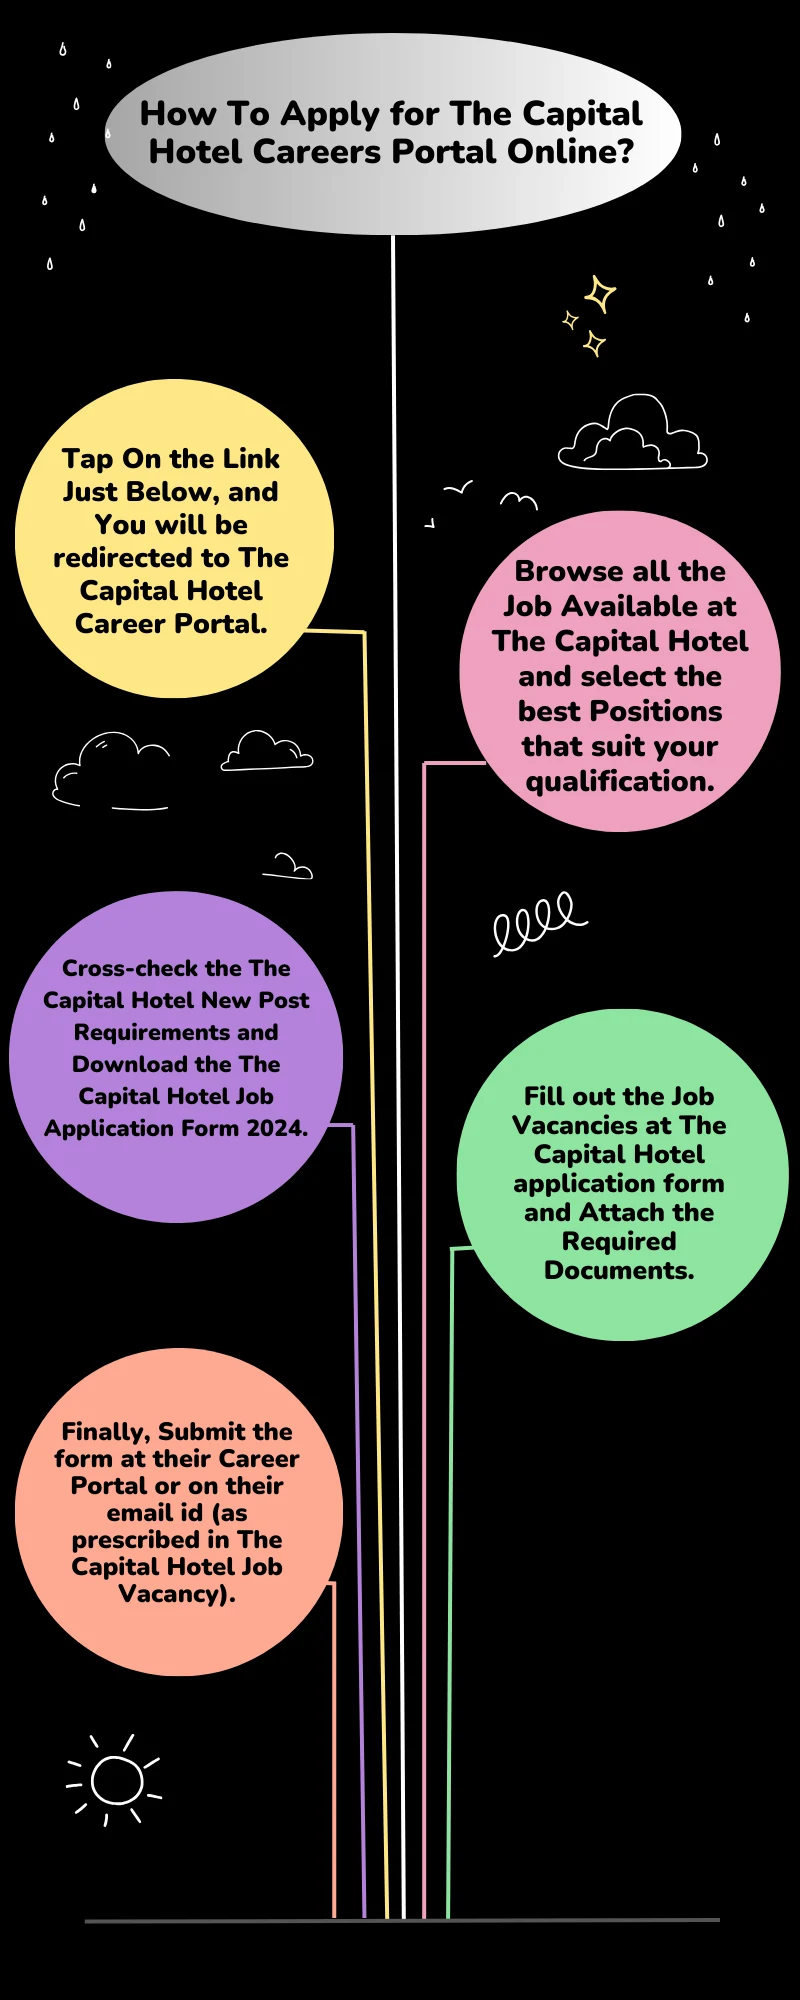 How To Apply for The Capital Hotel Careers Portal Online?